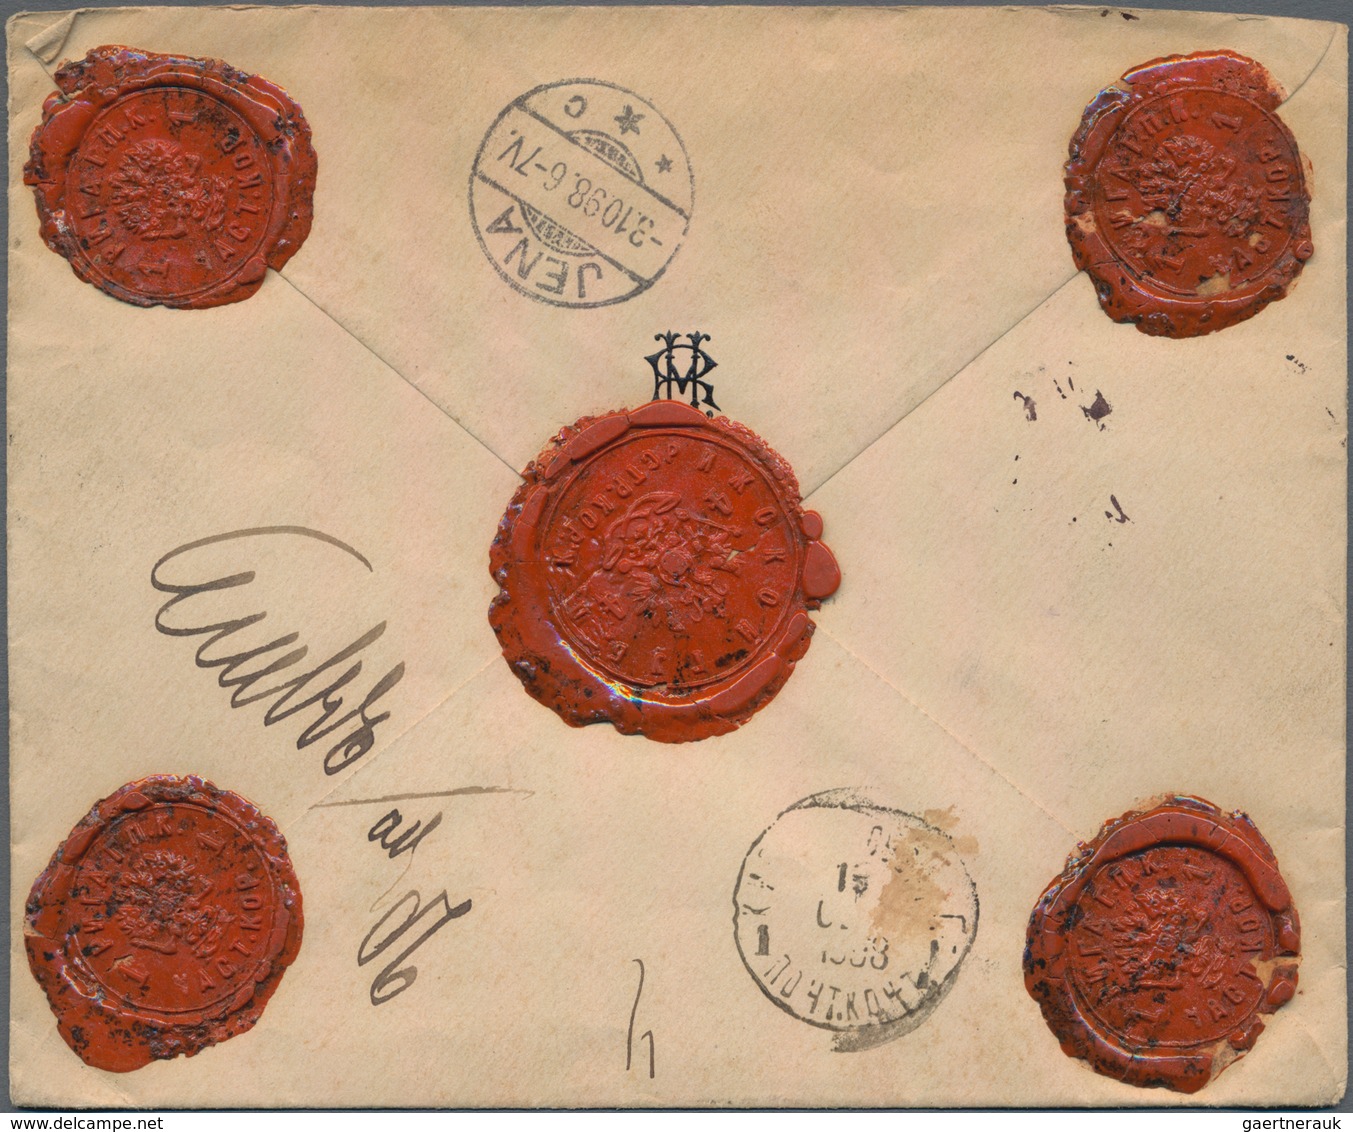 Russland: 1898, Value Letter Over 4 Rubles With Well Preserved Wax Seals From Riga To Jena. - Gebraucht